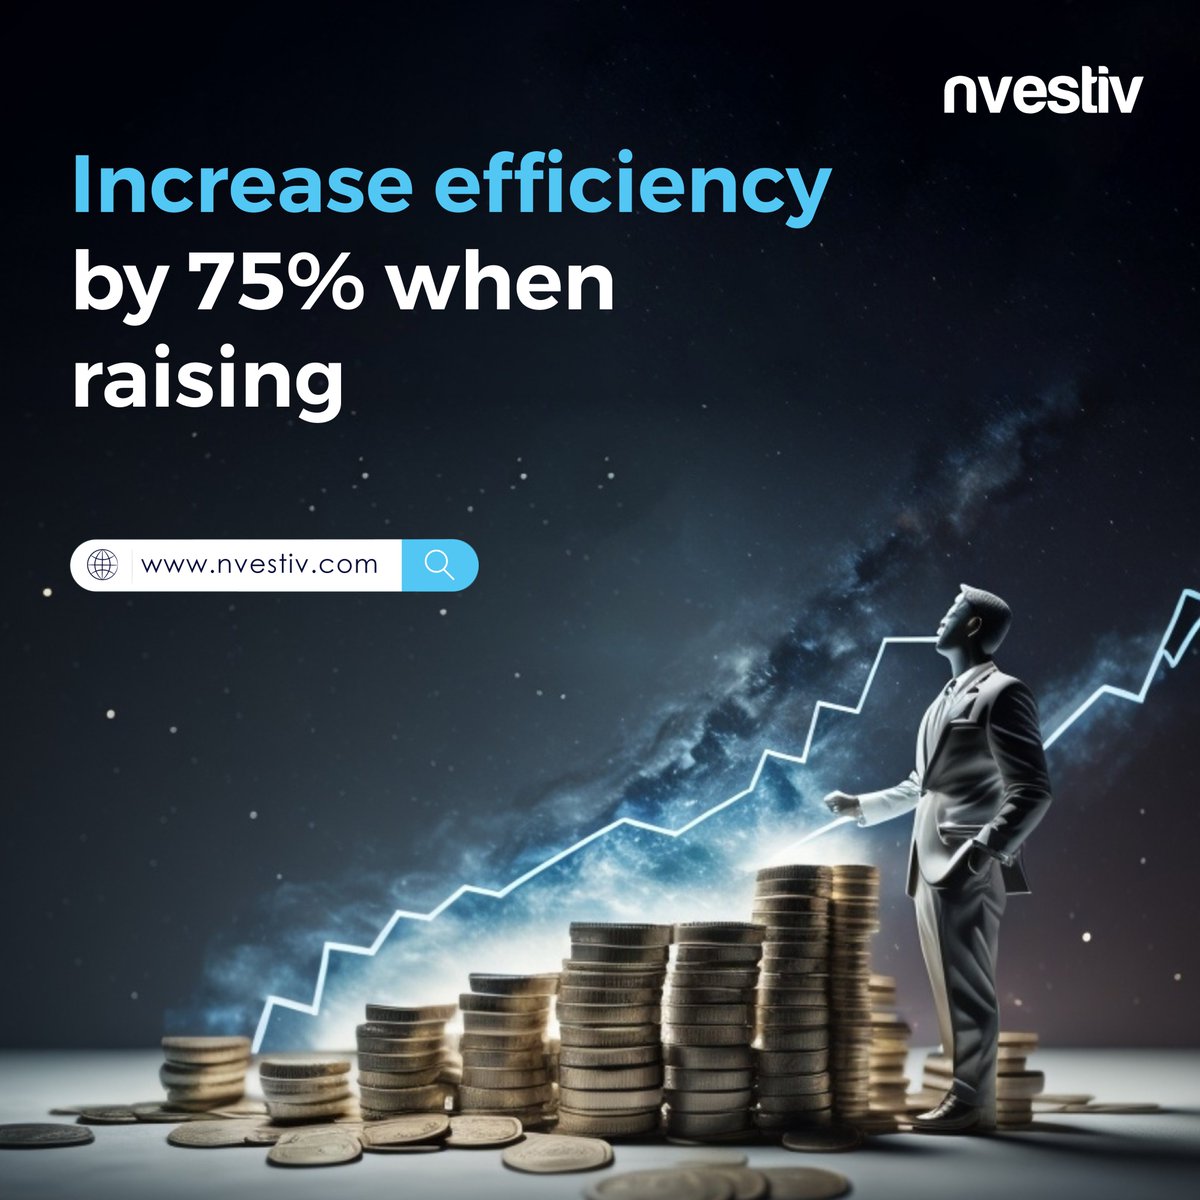 Schedule a call: api.clixlo.com/widget/booking…

Boost your fundraising efficiency by cutting down the time and effort it takes to organize documentation and focus on accelerating your capital-raising journey.

#fundraisingmadeeasy #nvestiv #capitalraising #fundraising